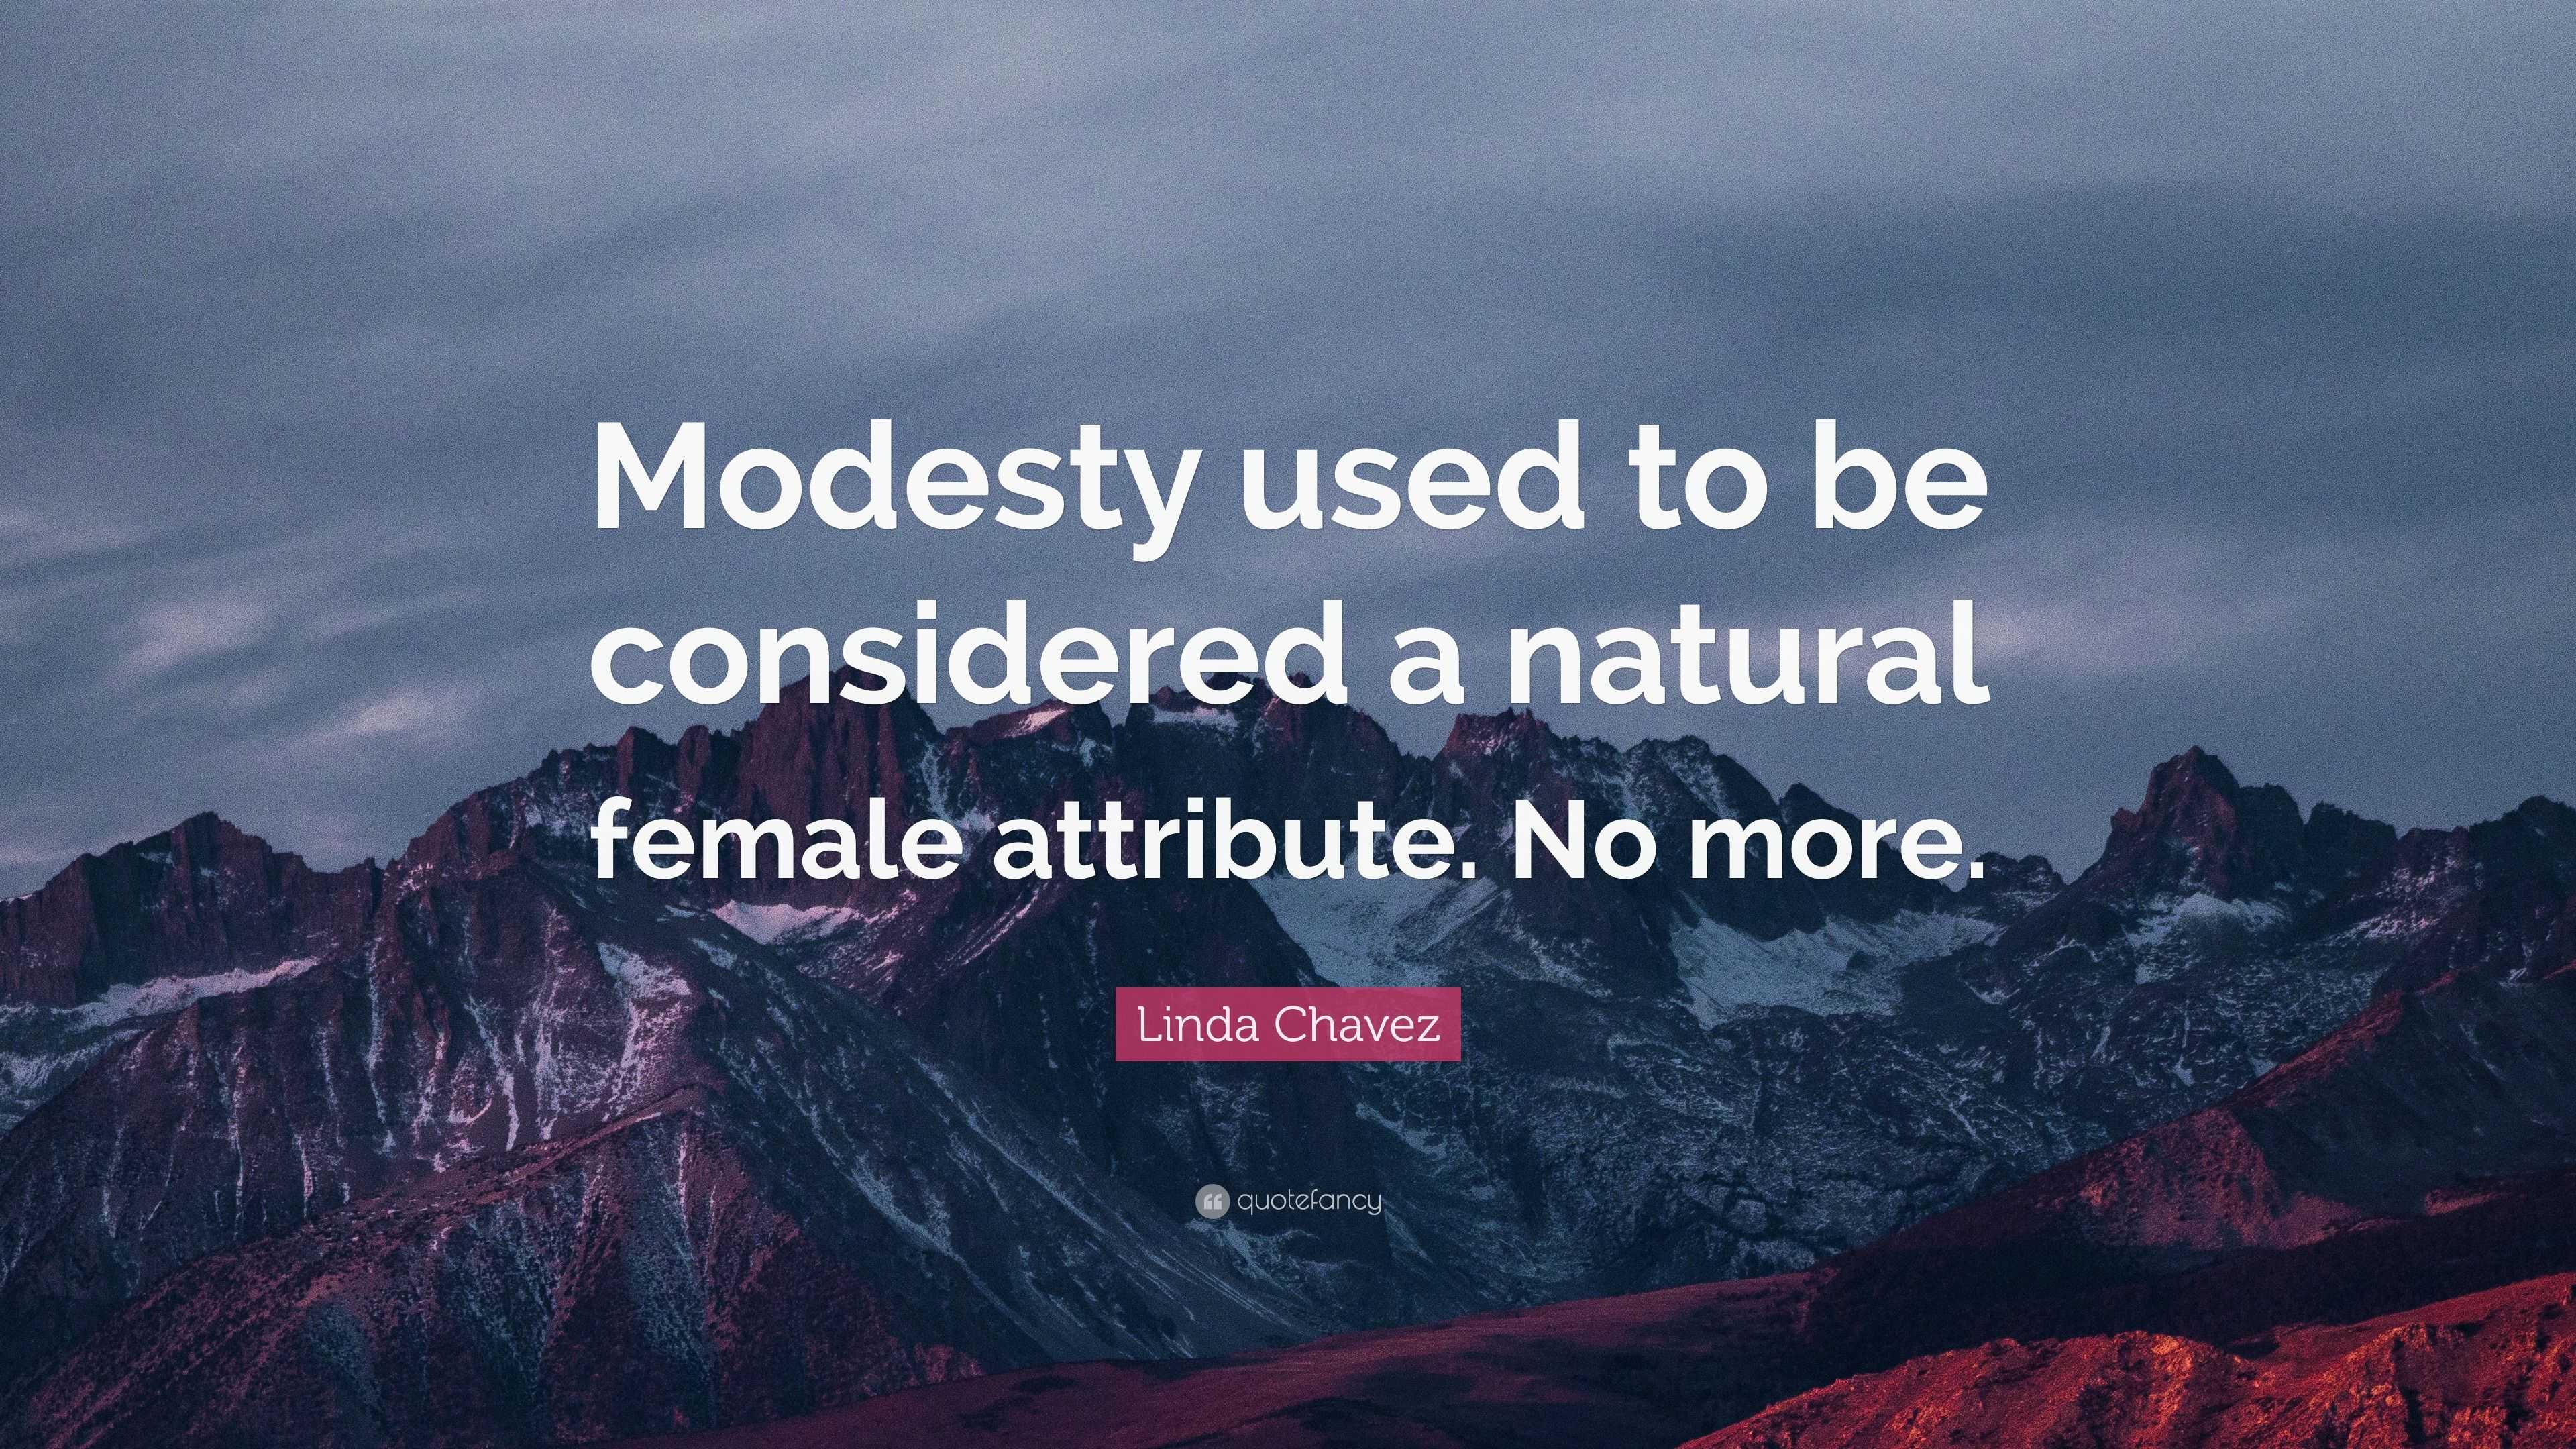 Linda Chavez Quote “Modesty used to be considered a natural female